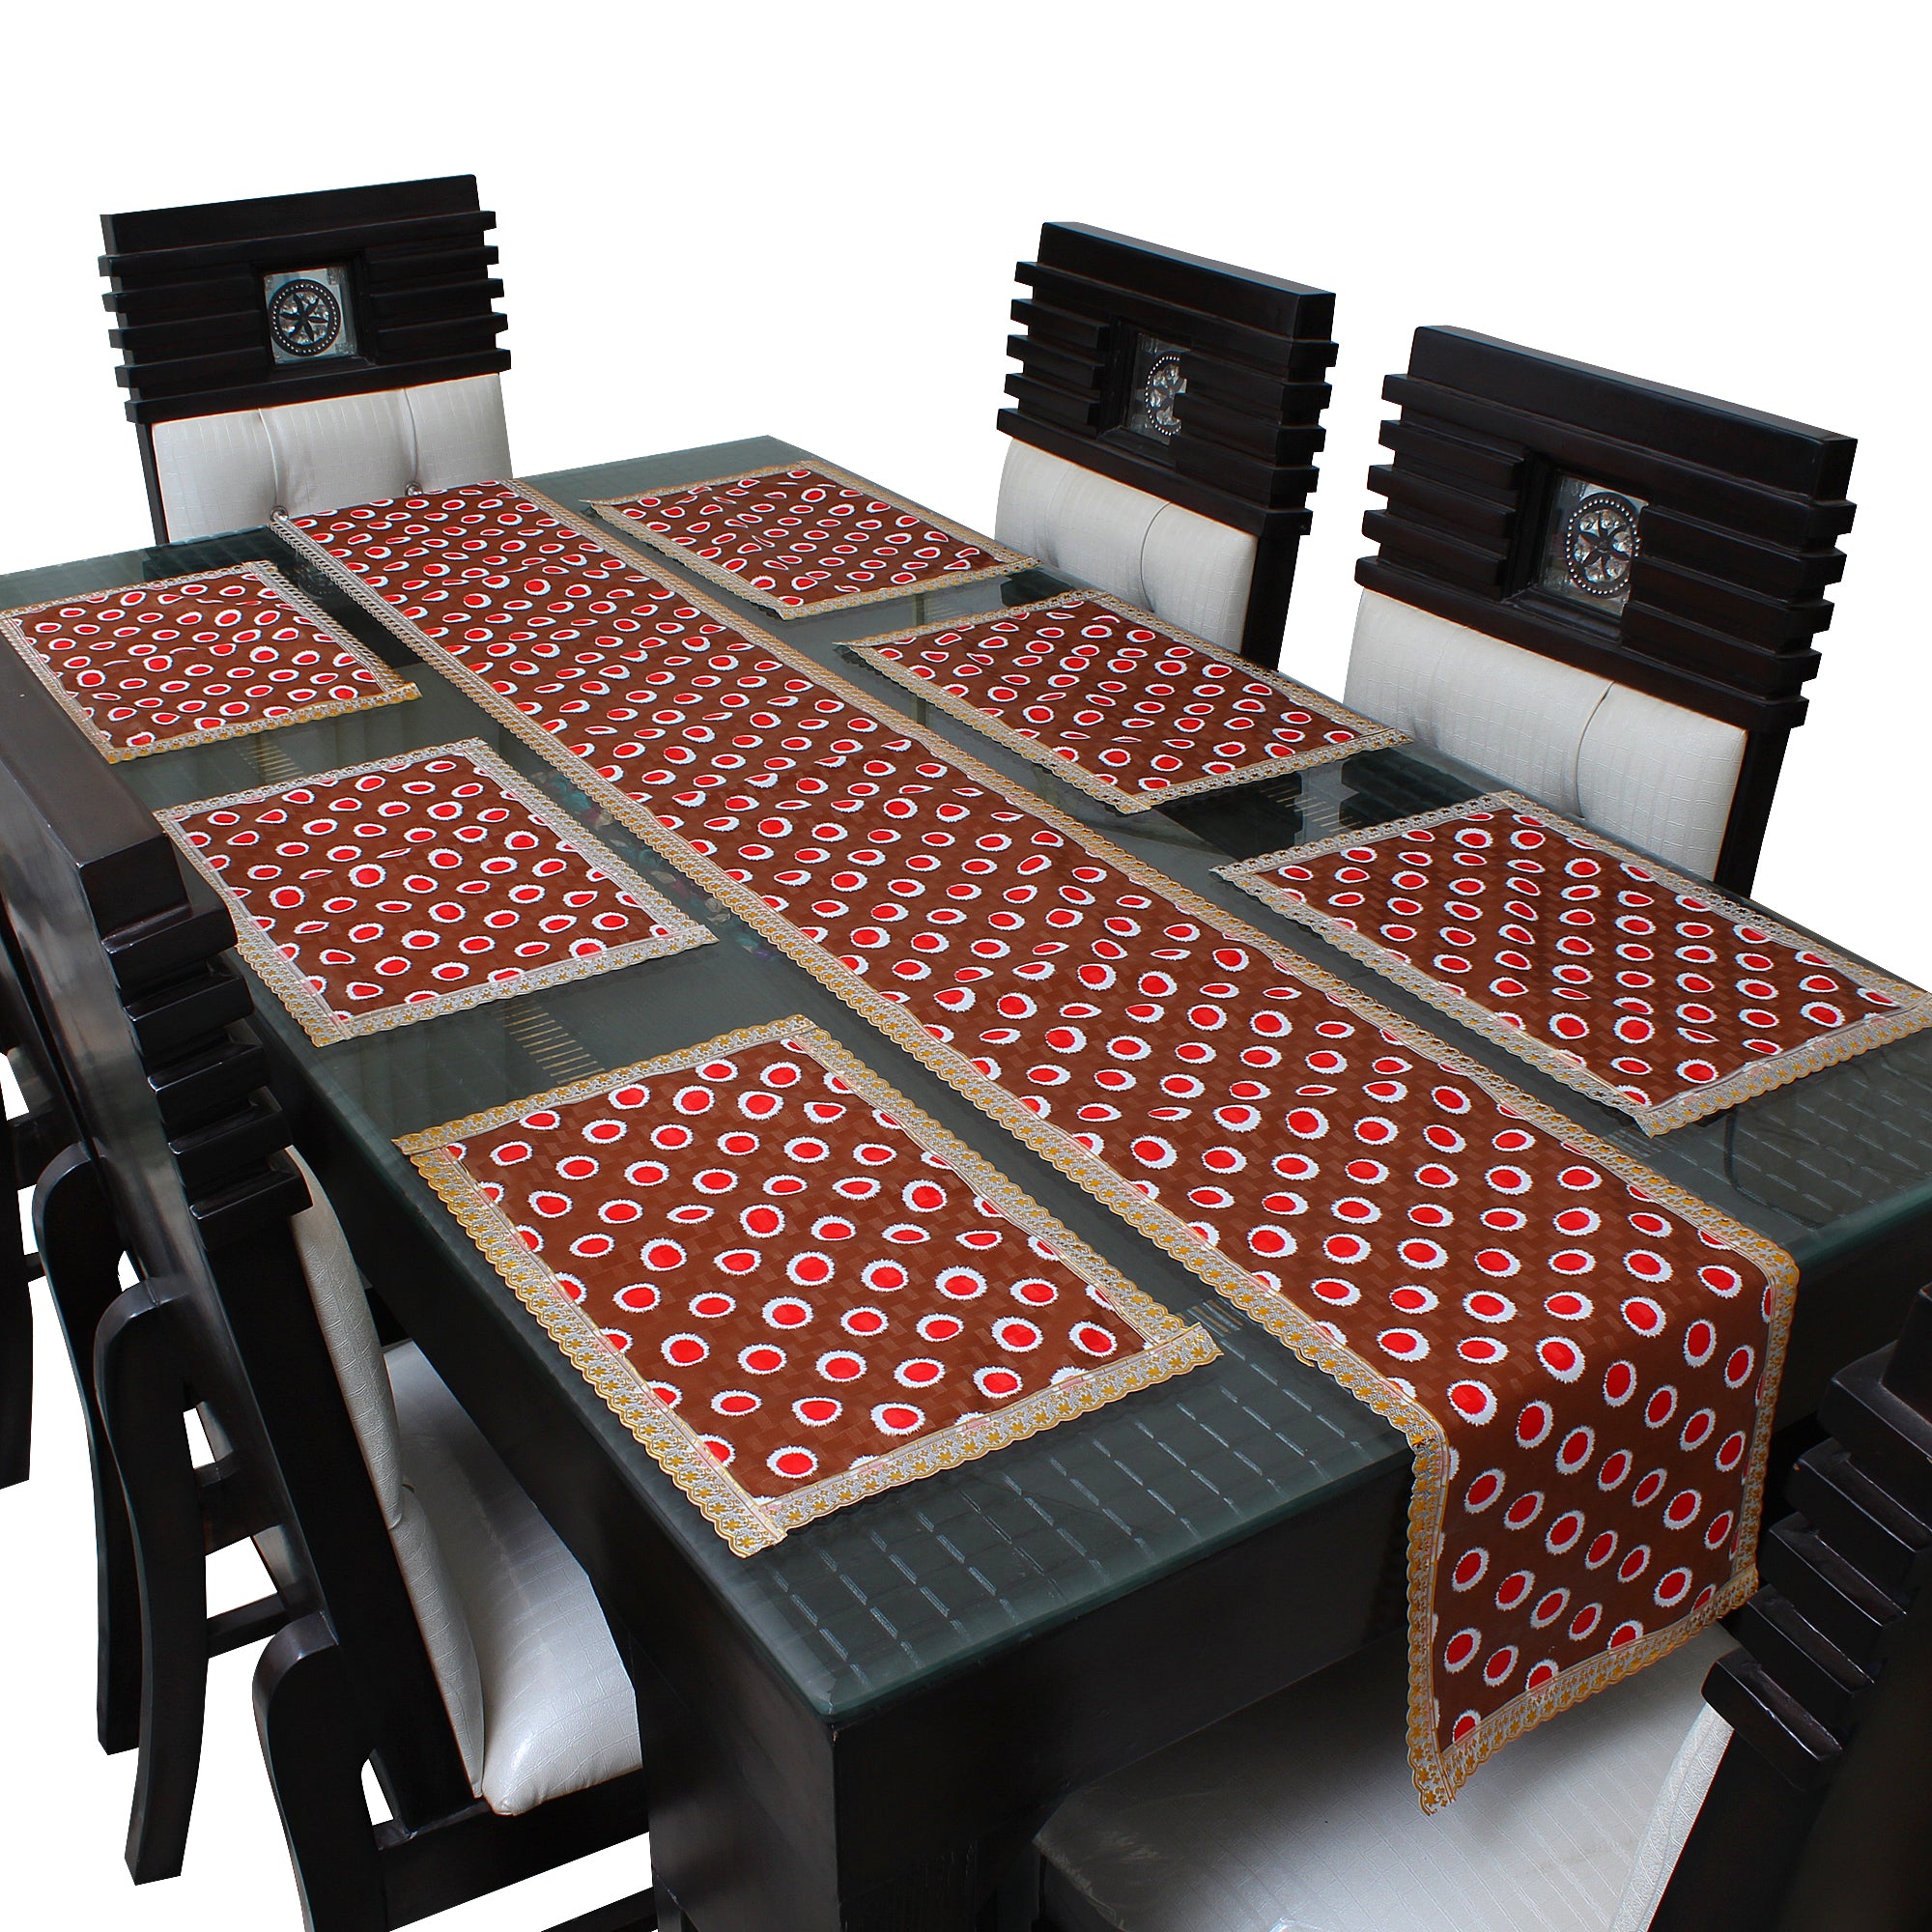 Waterproof & Dustproof Dining Table Runner With 6 Placemats, SA45 - Dream Care Furnishings Private Limited